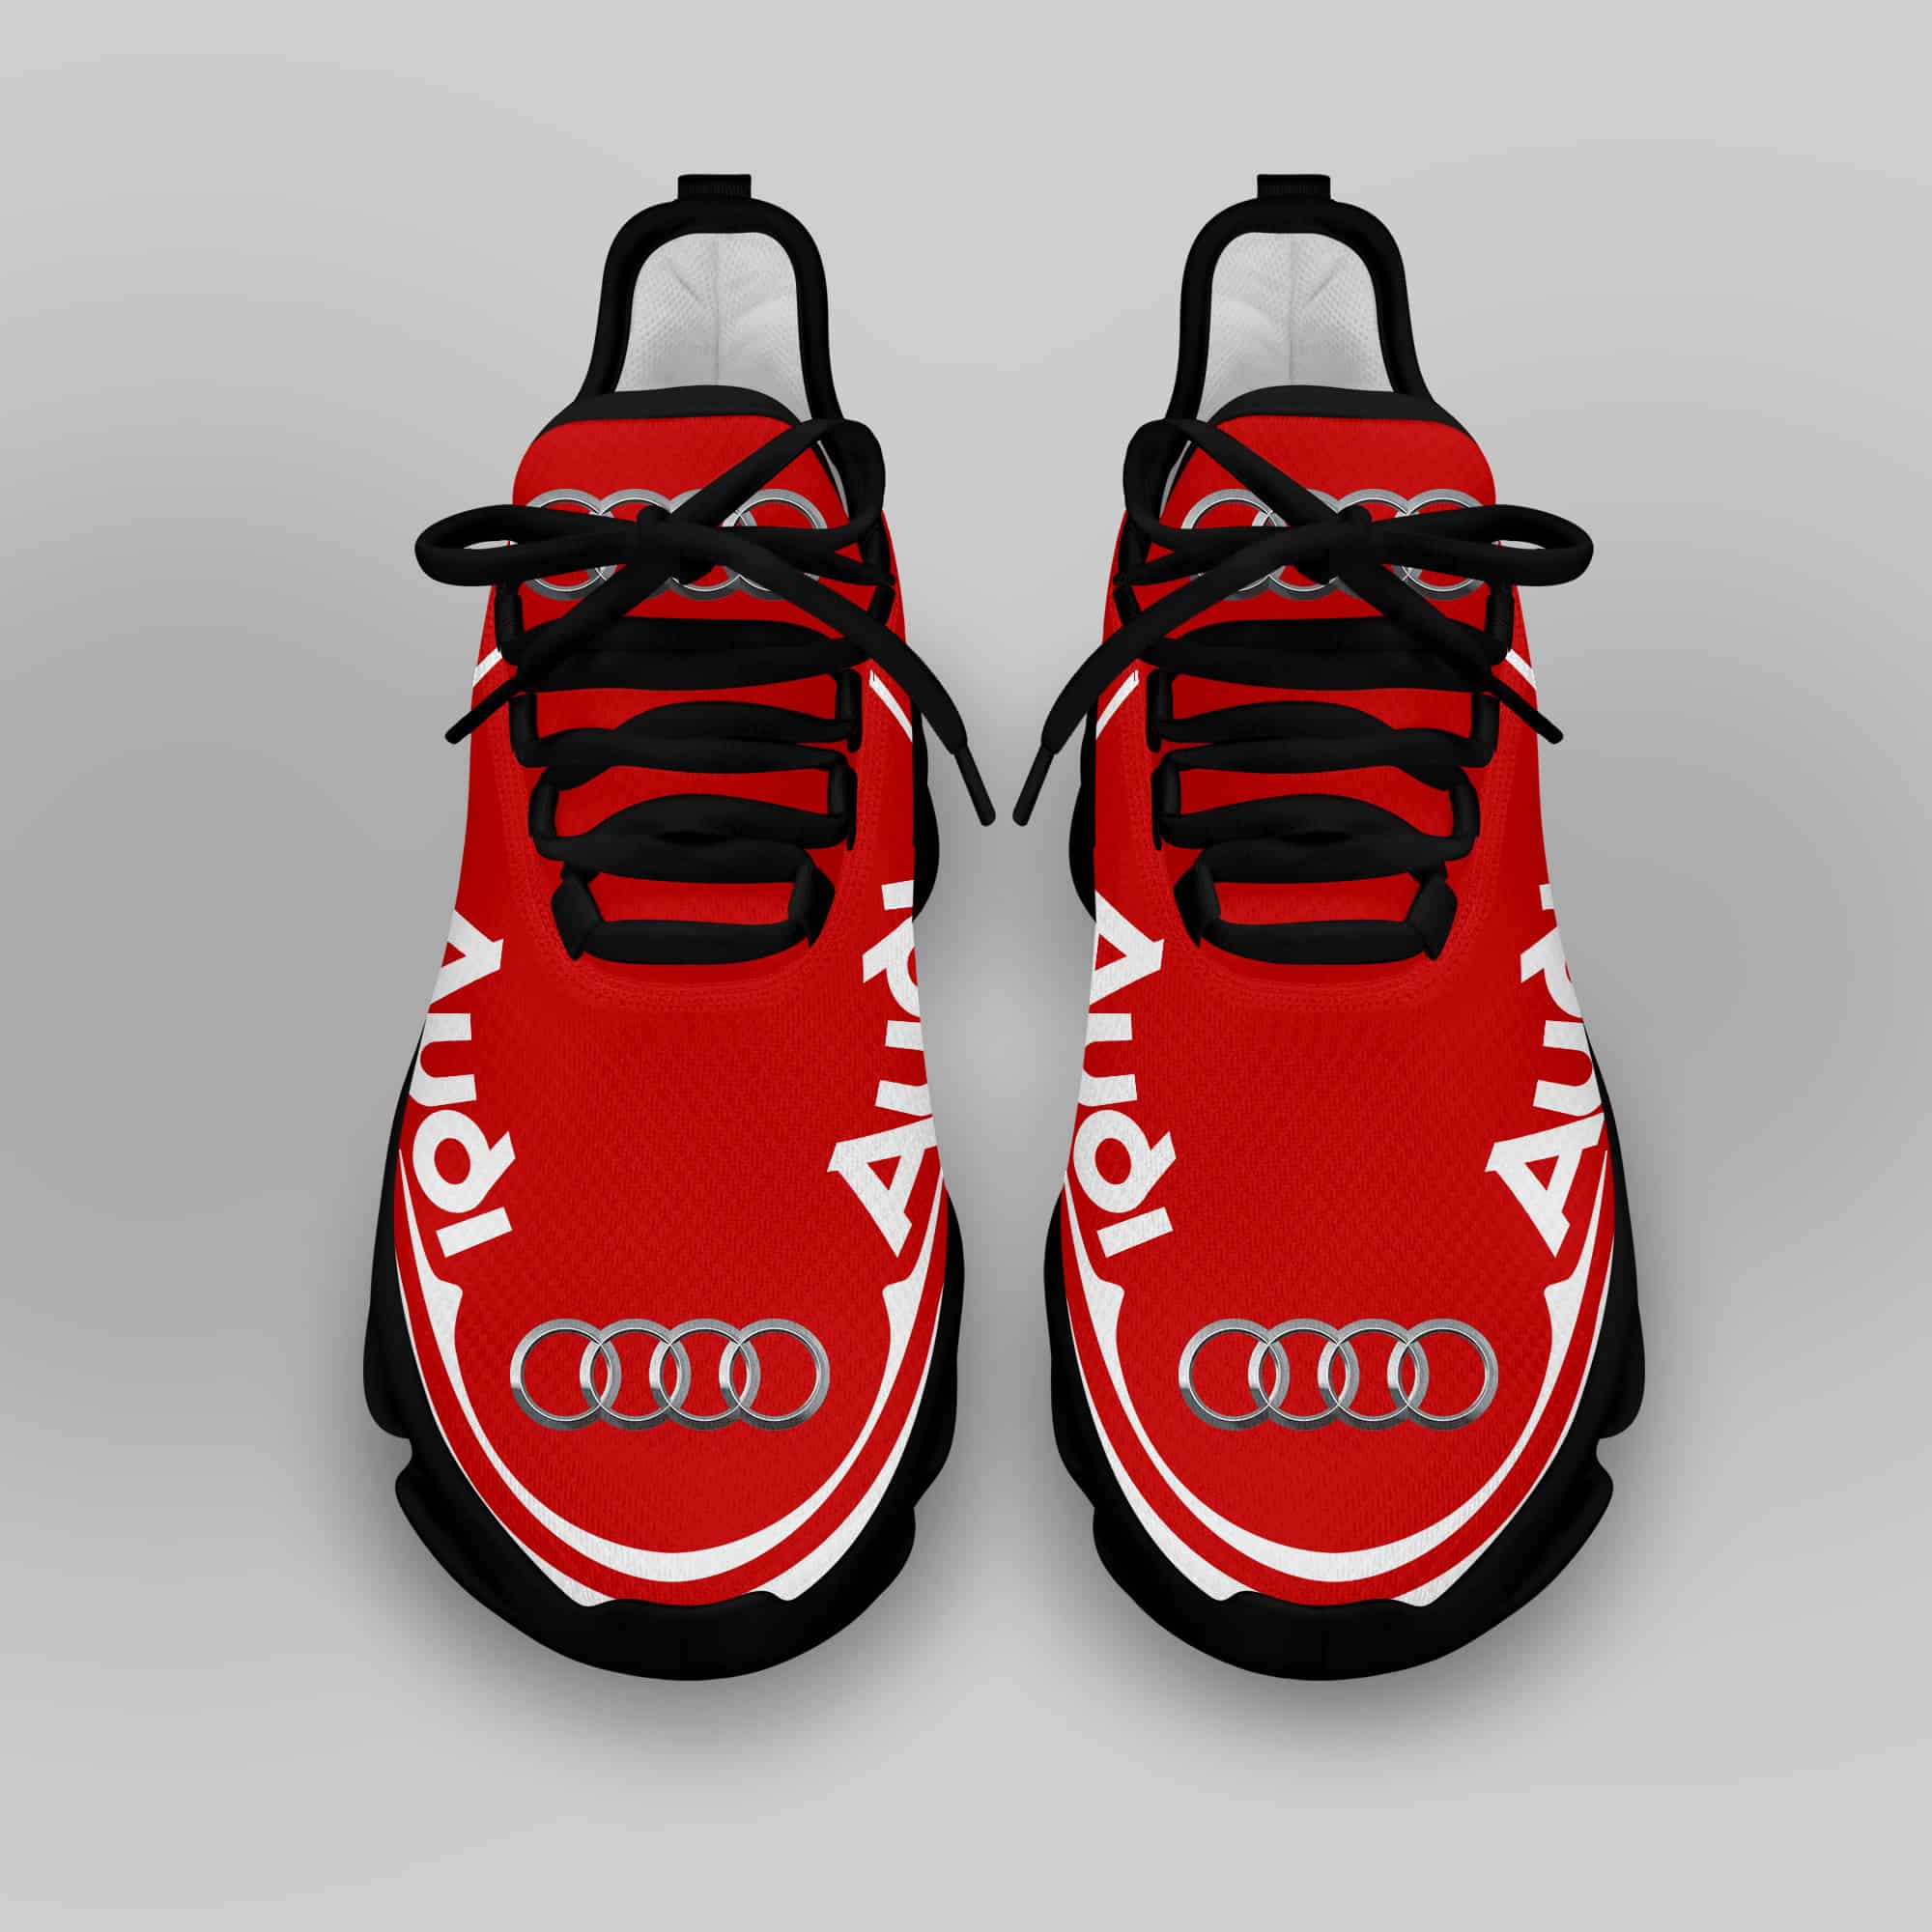 Audi Sport Running Shoes Max Soul Shoes Sneakers Ver 42 4